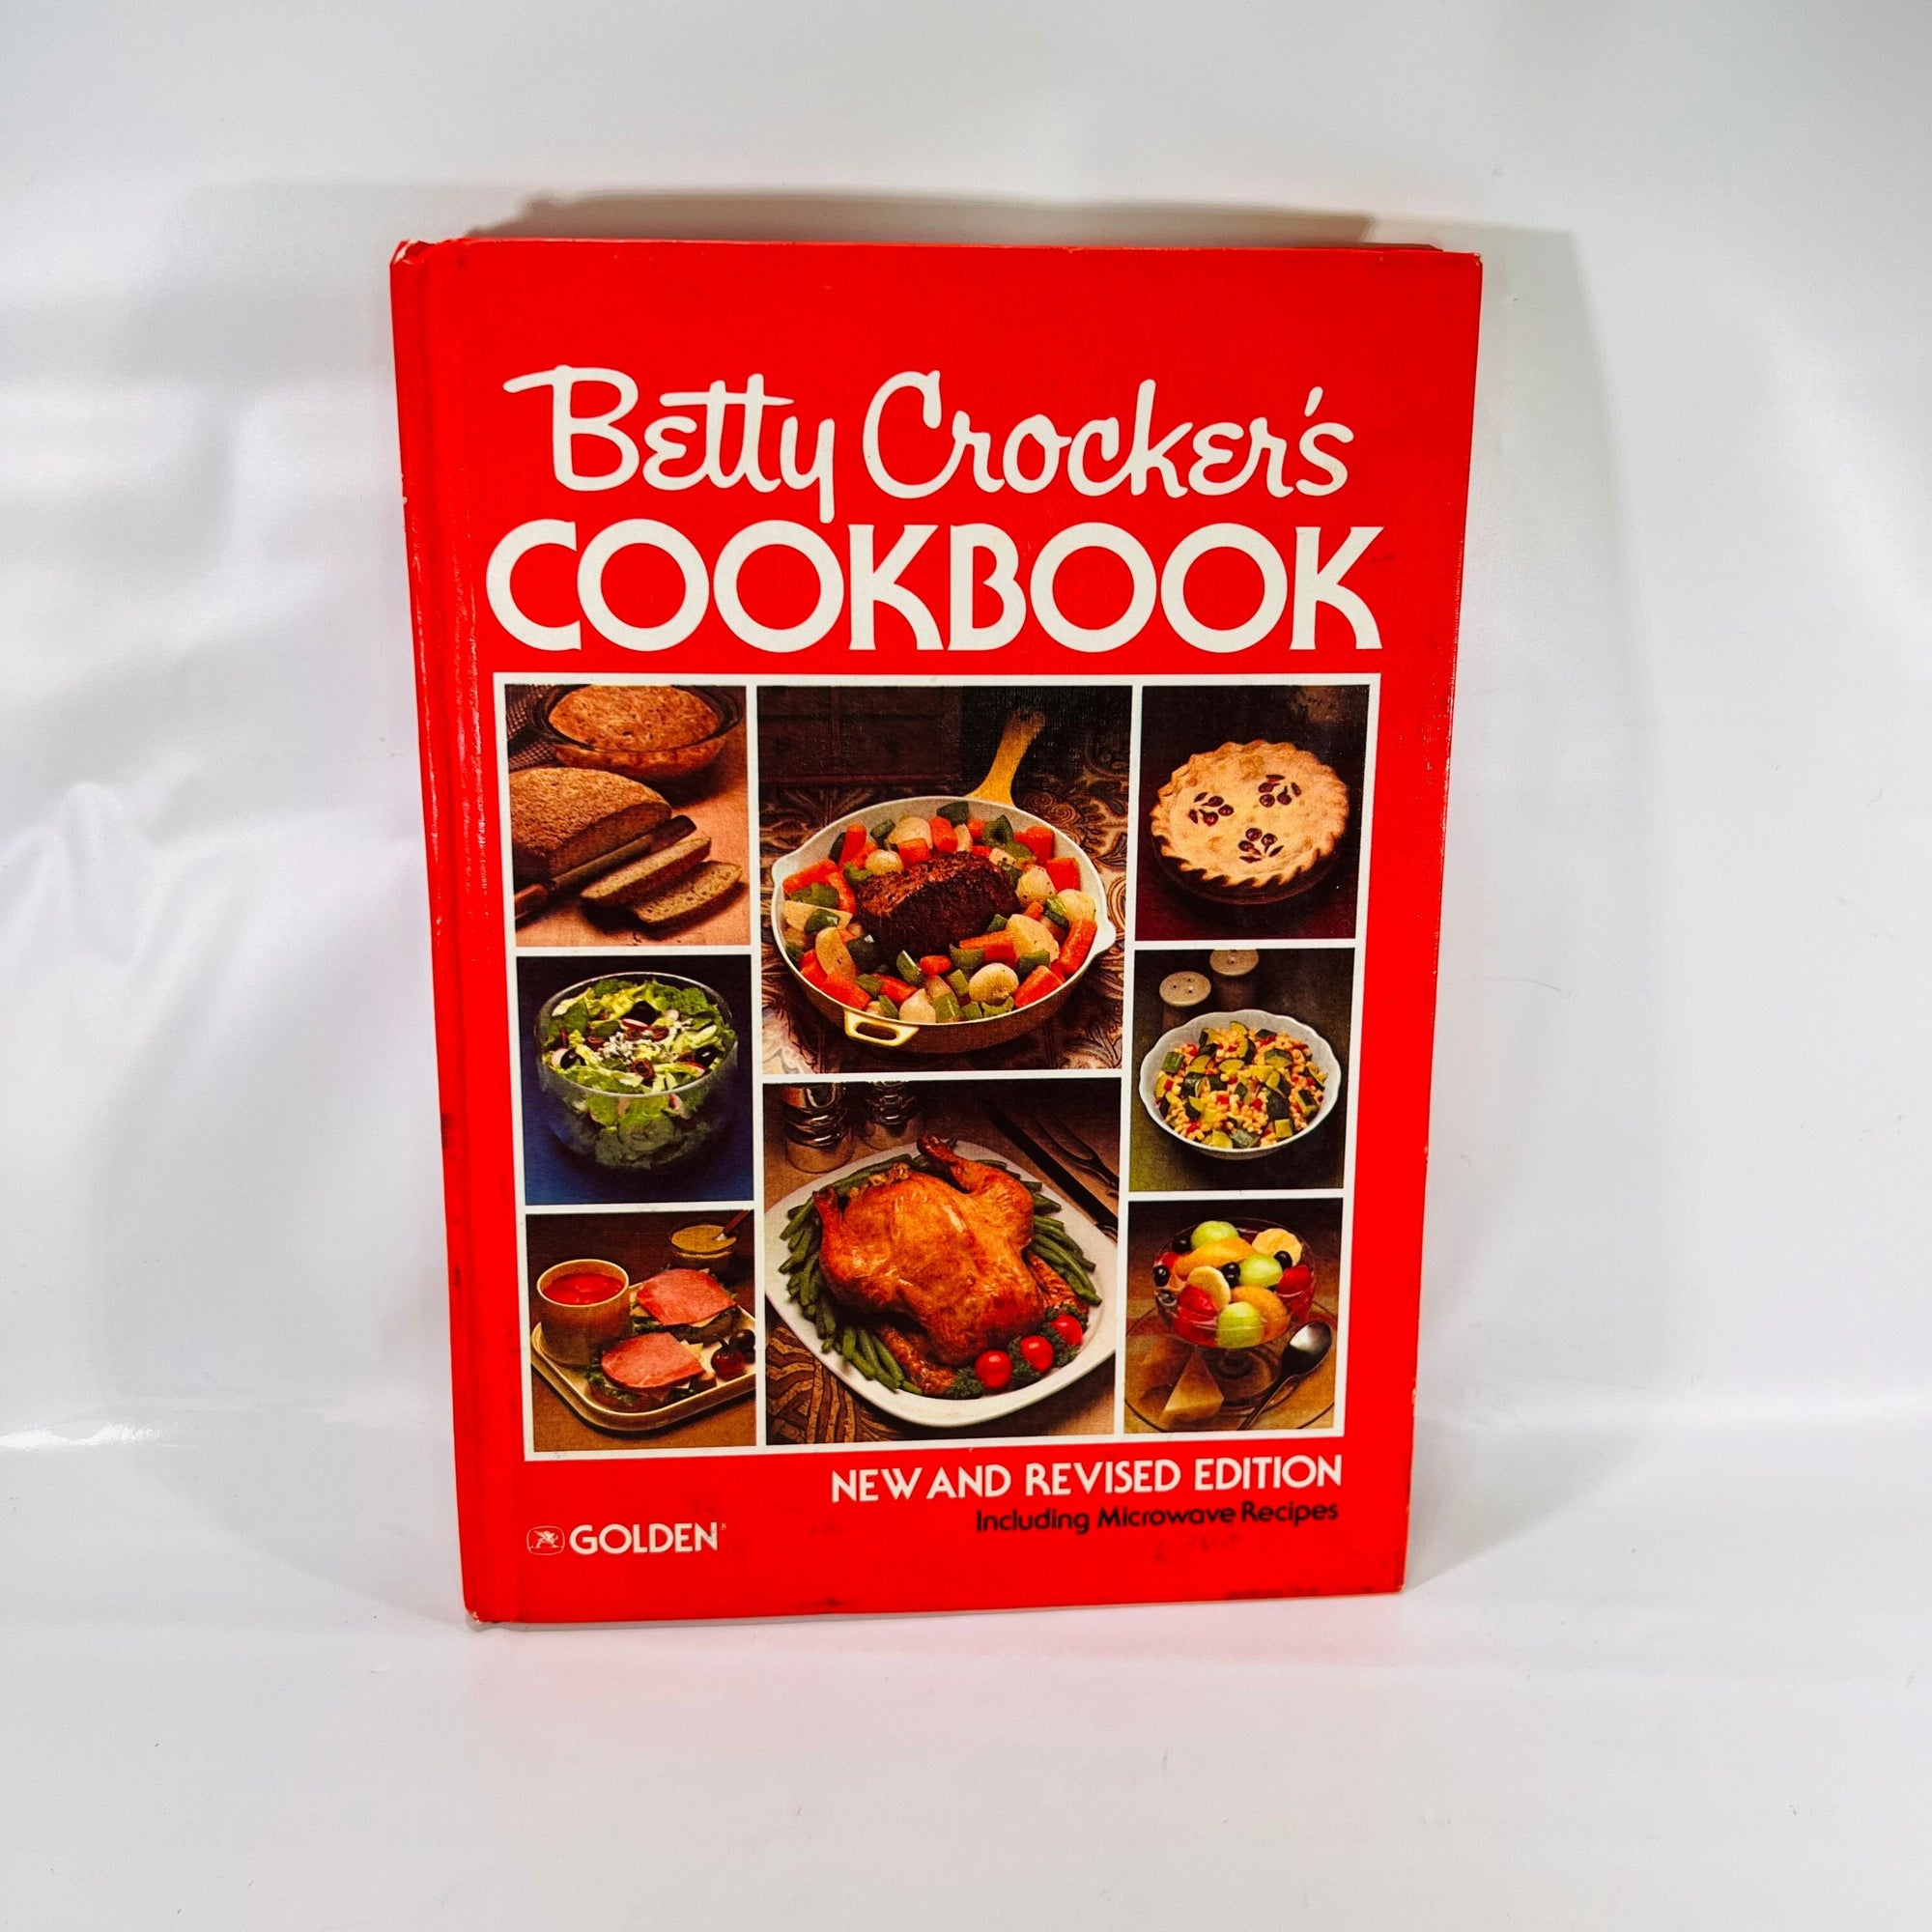 Betty Crocker Cookbook New and Revised Edition including Microwave 1978 Golden Vintage Recipes Collectable Cooking